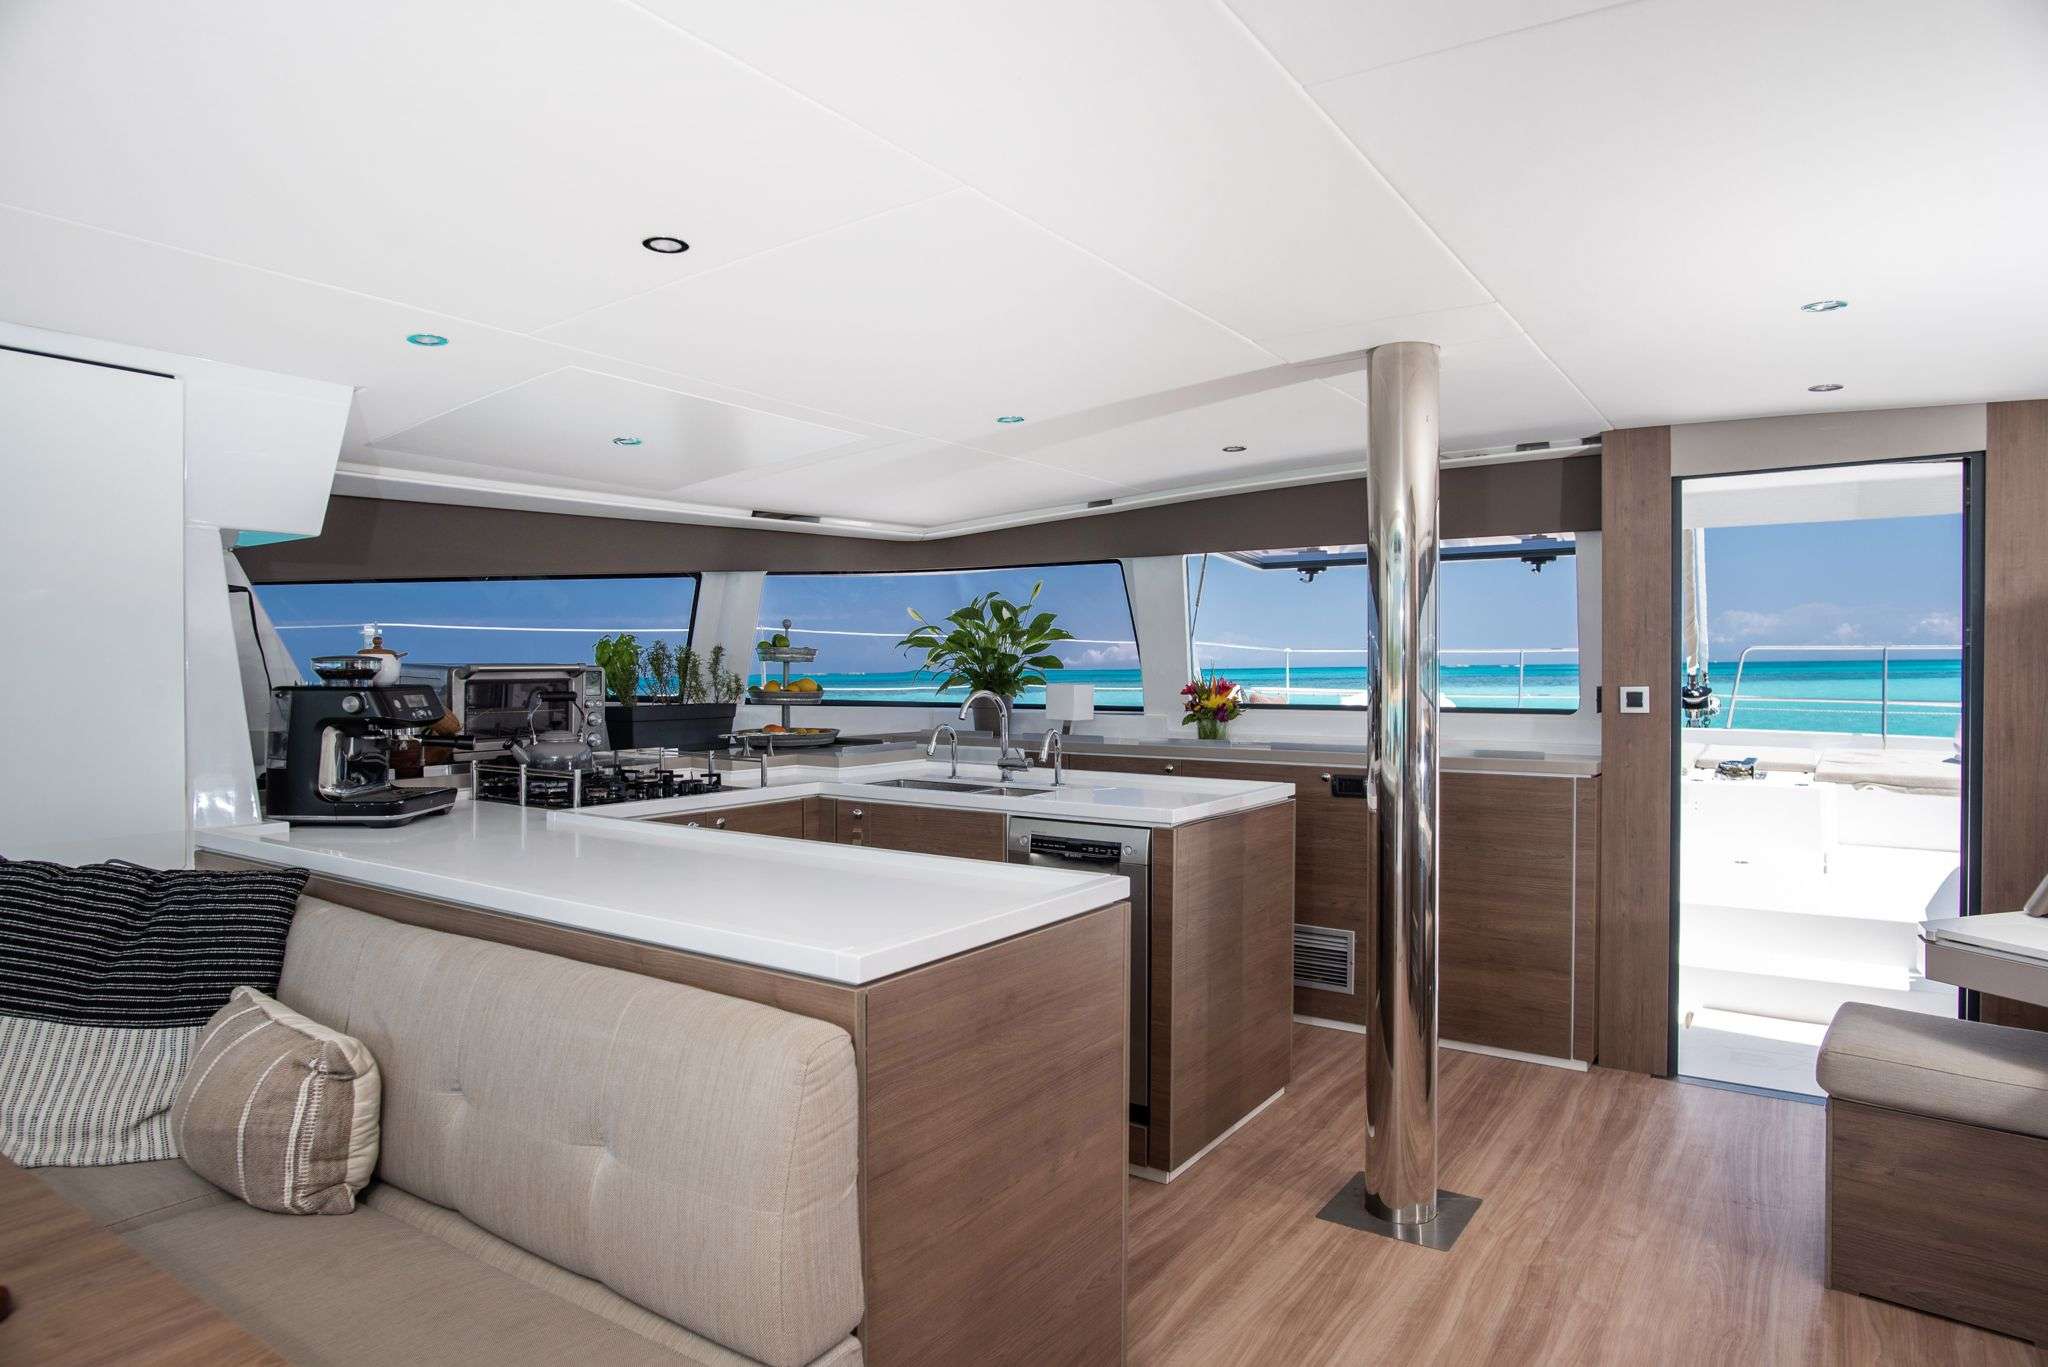 LOCATION 5.4 Yacht Charter - Galley